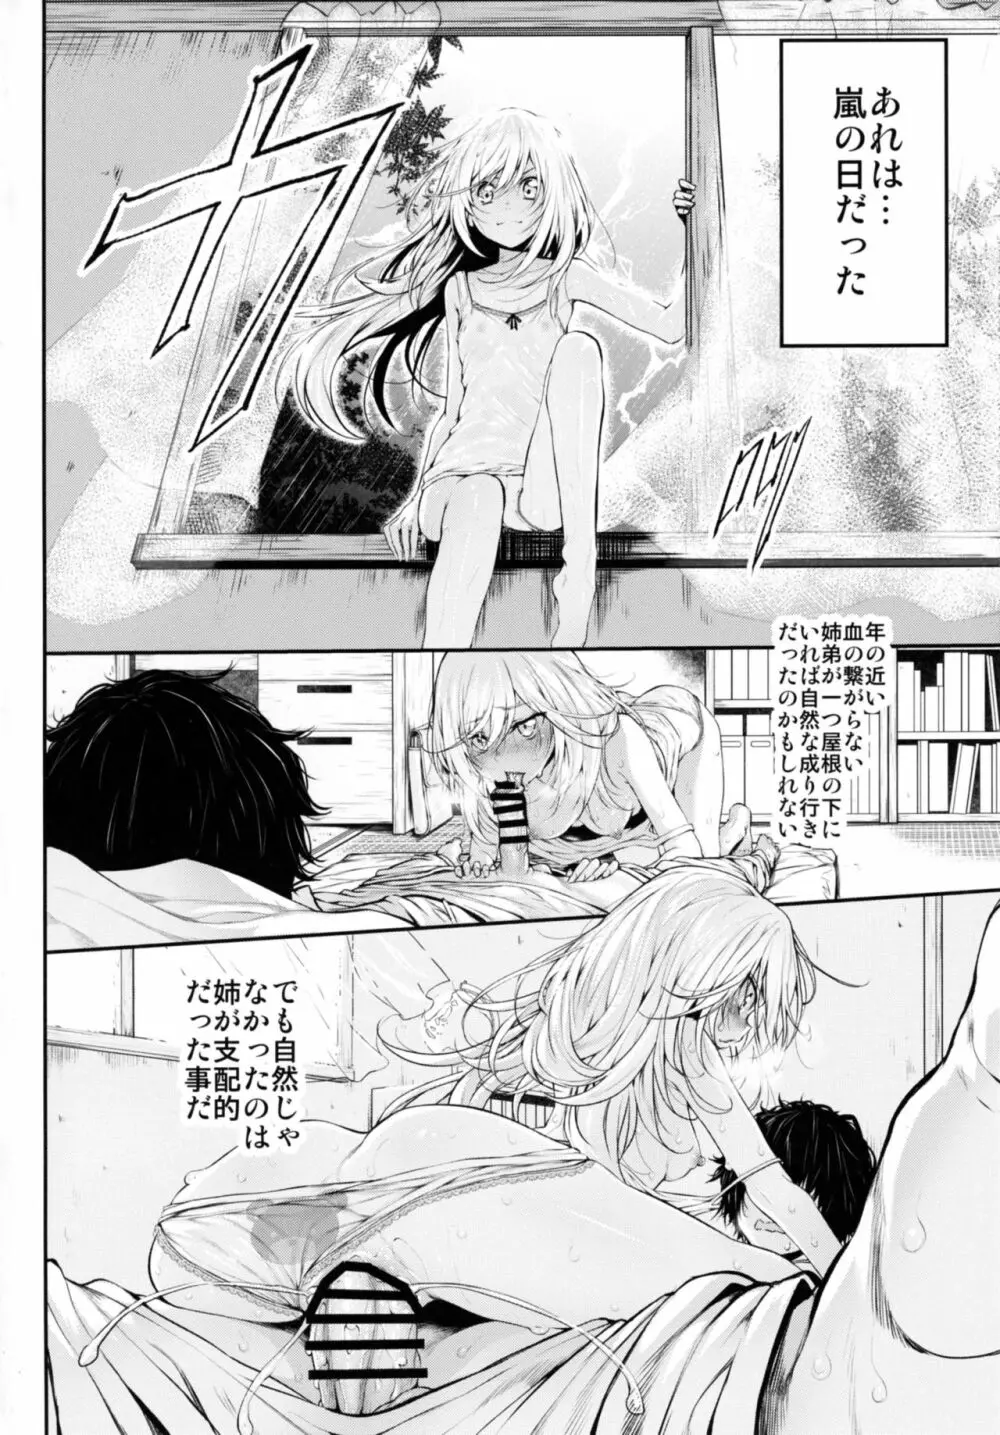 Marked girls vol. 11 Page.4